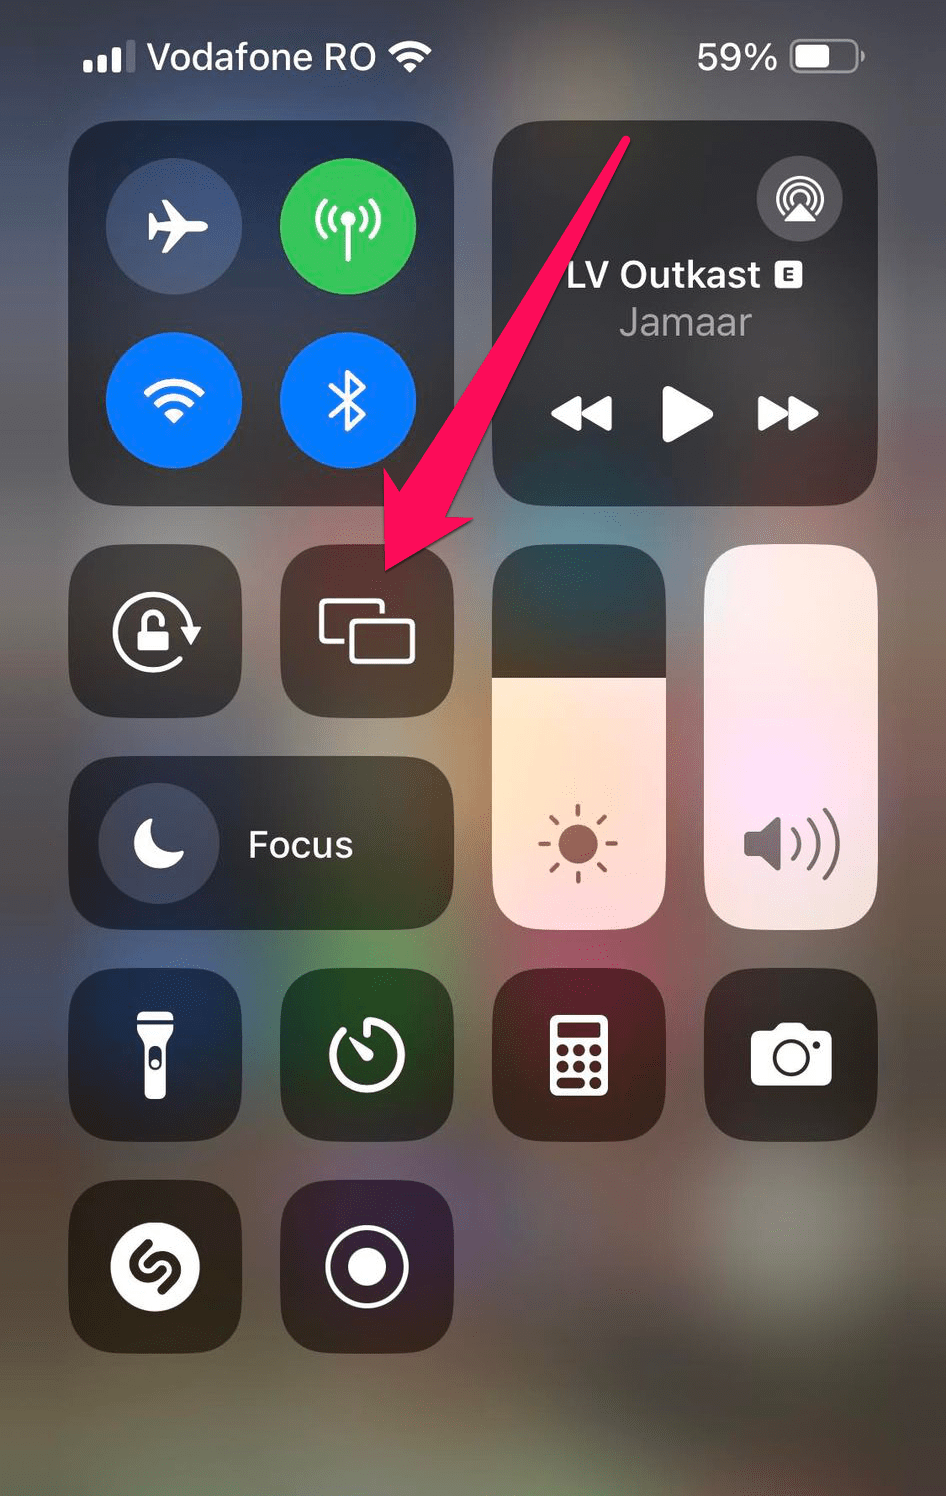 Tap on the Screen Mirroring option in the Control Center on iPhone